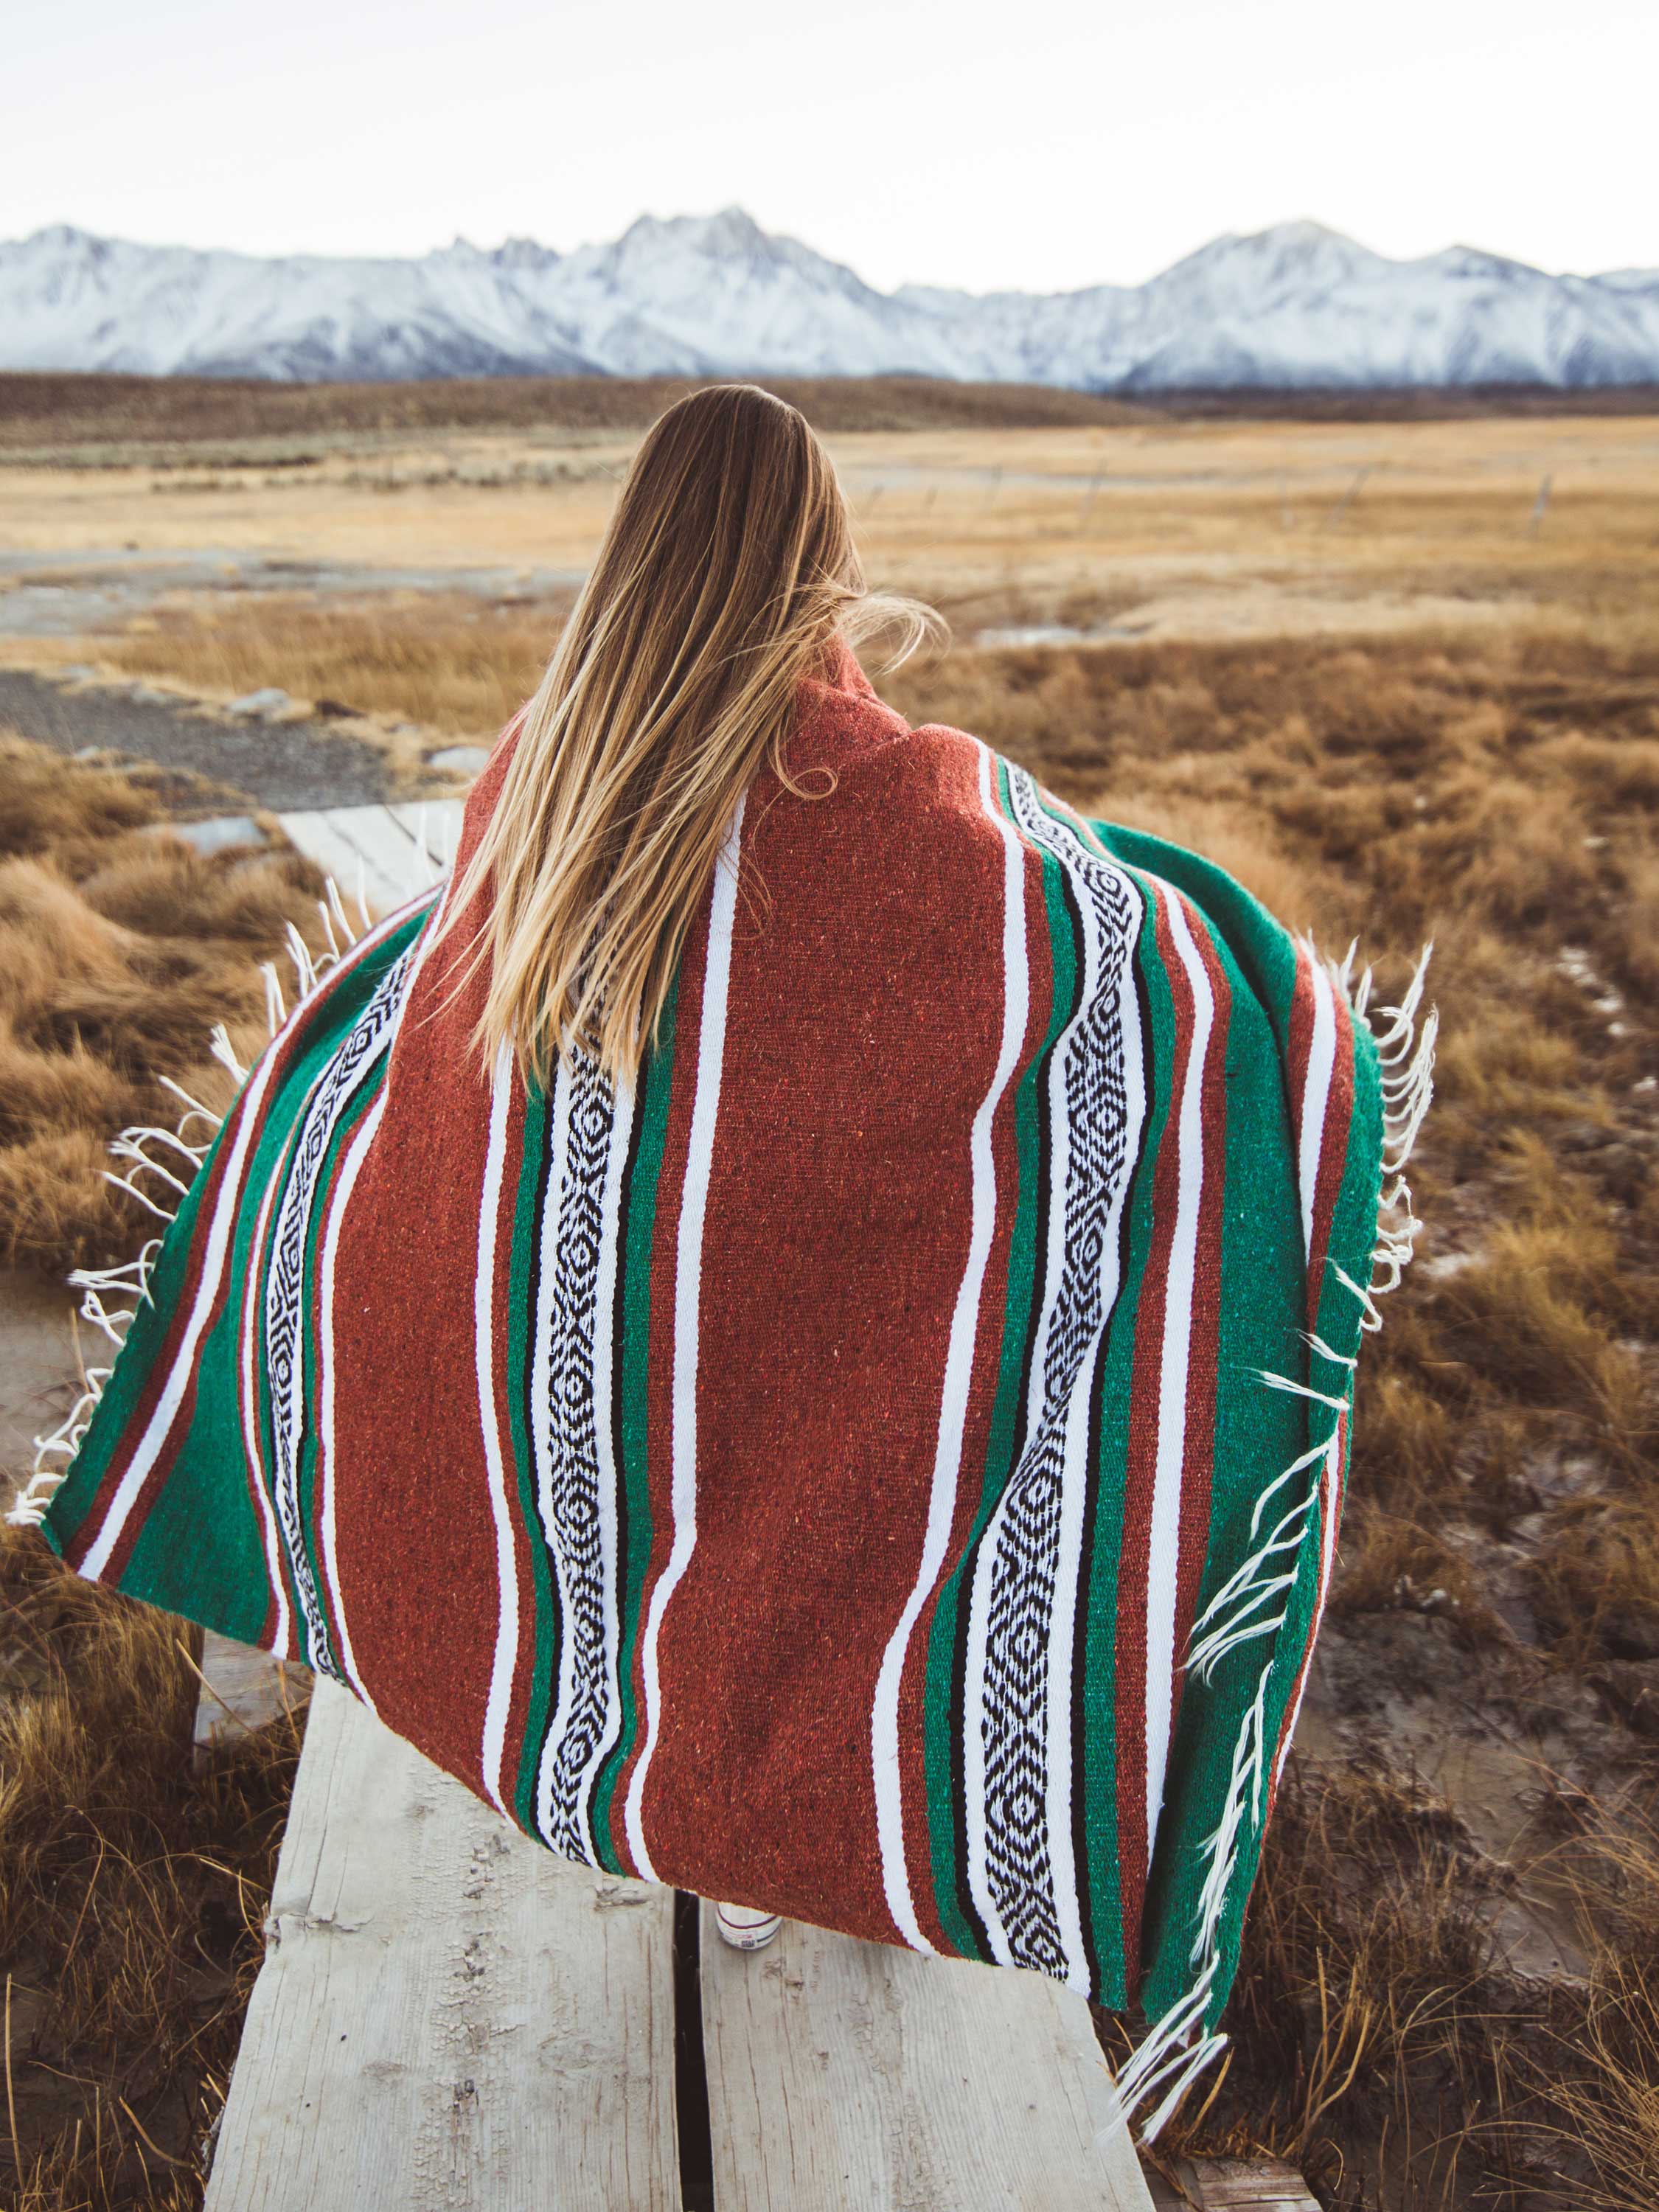 A woman walking towards mountains draped in a Mexican Blanket.